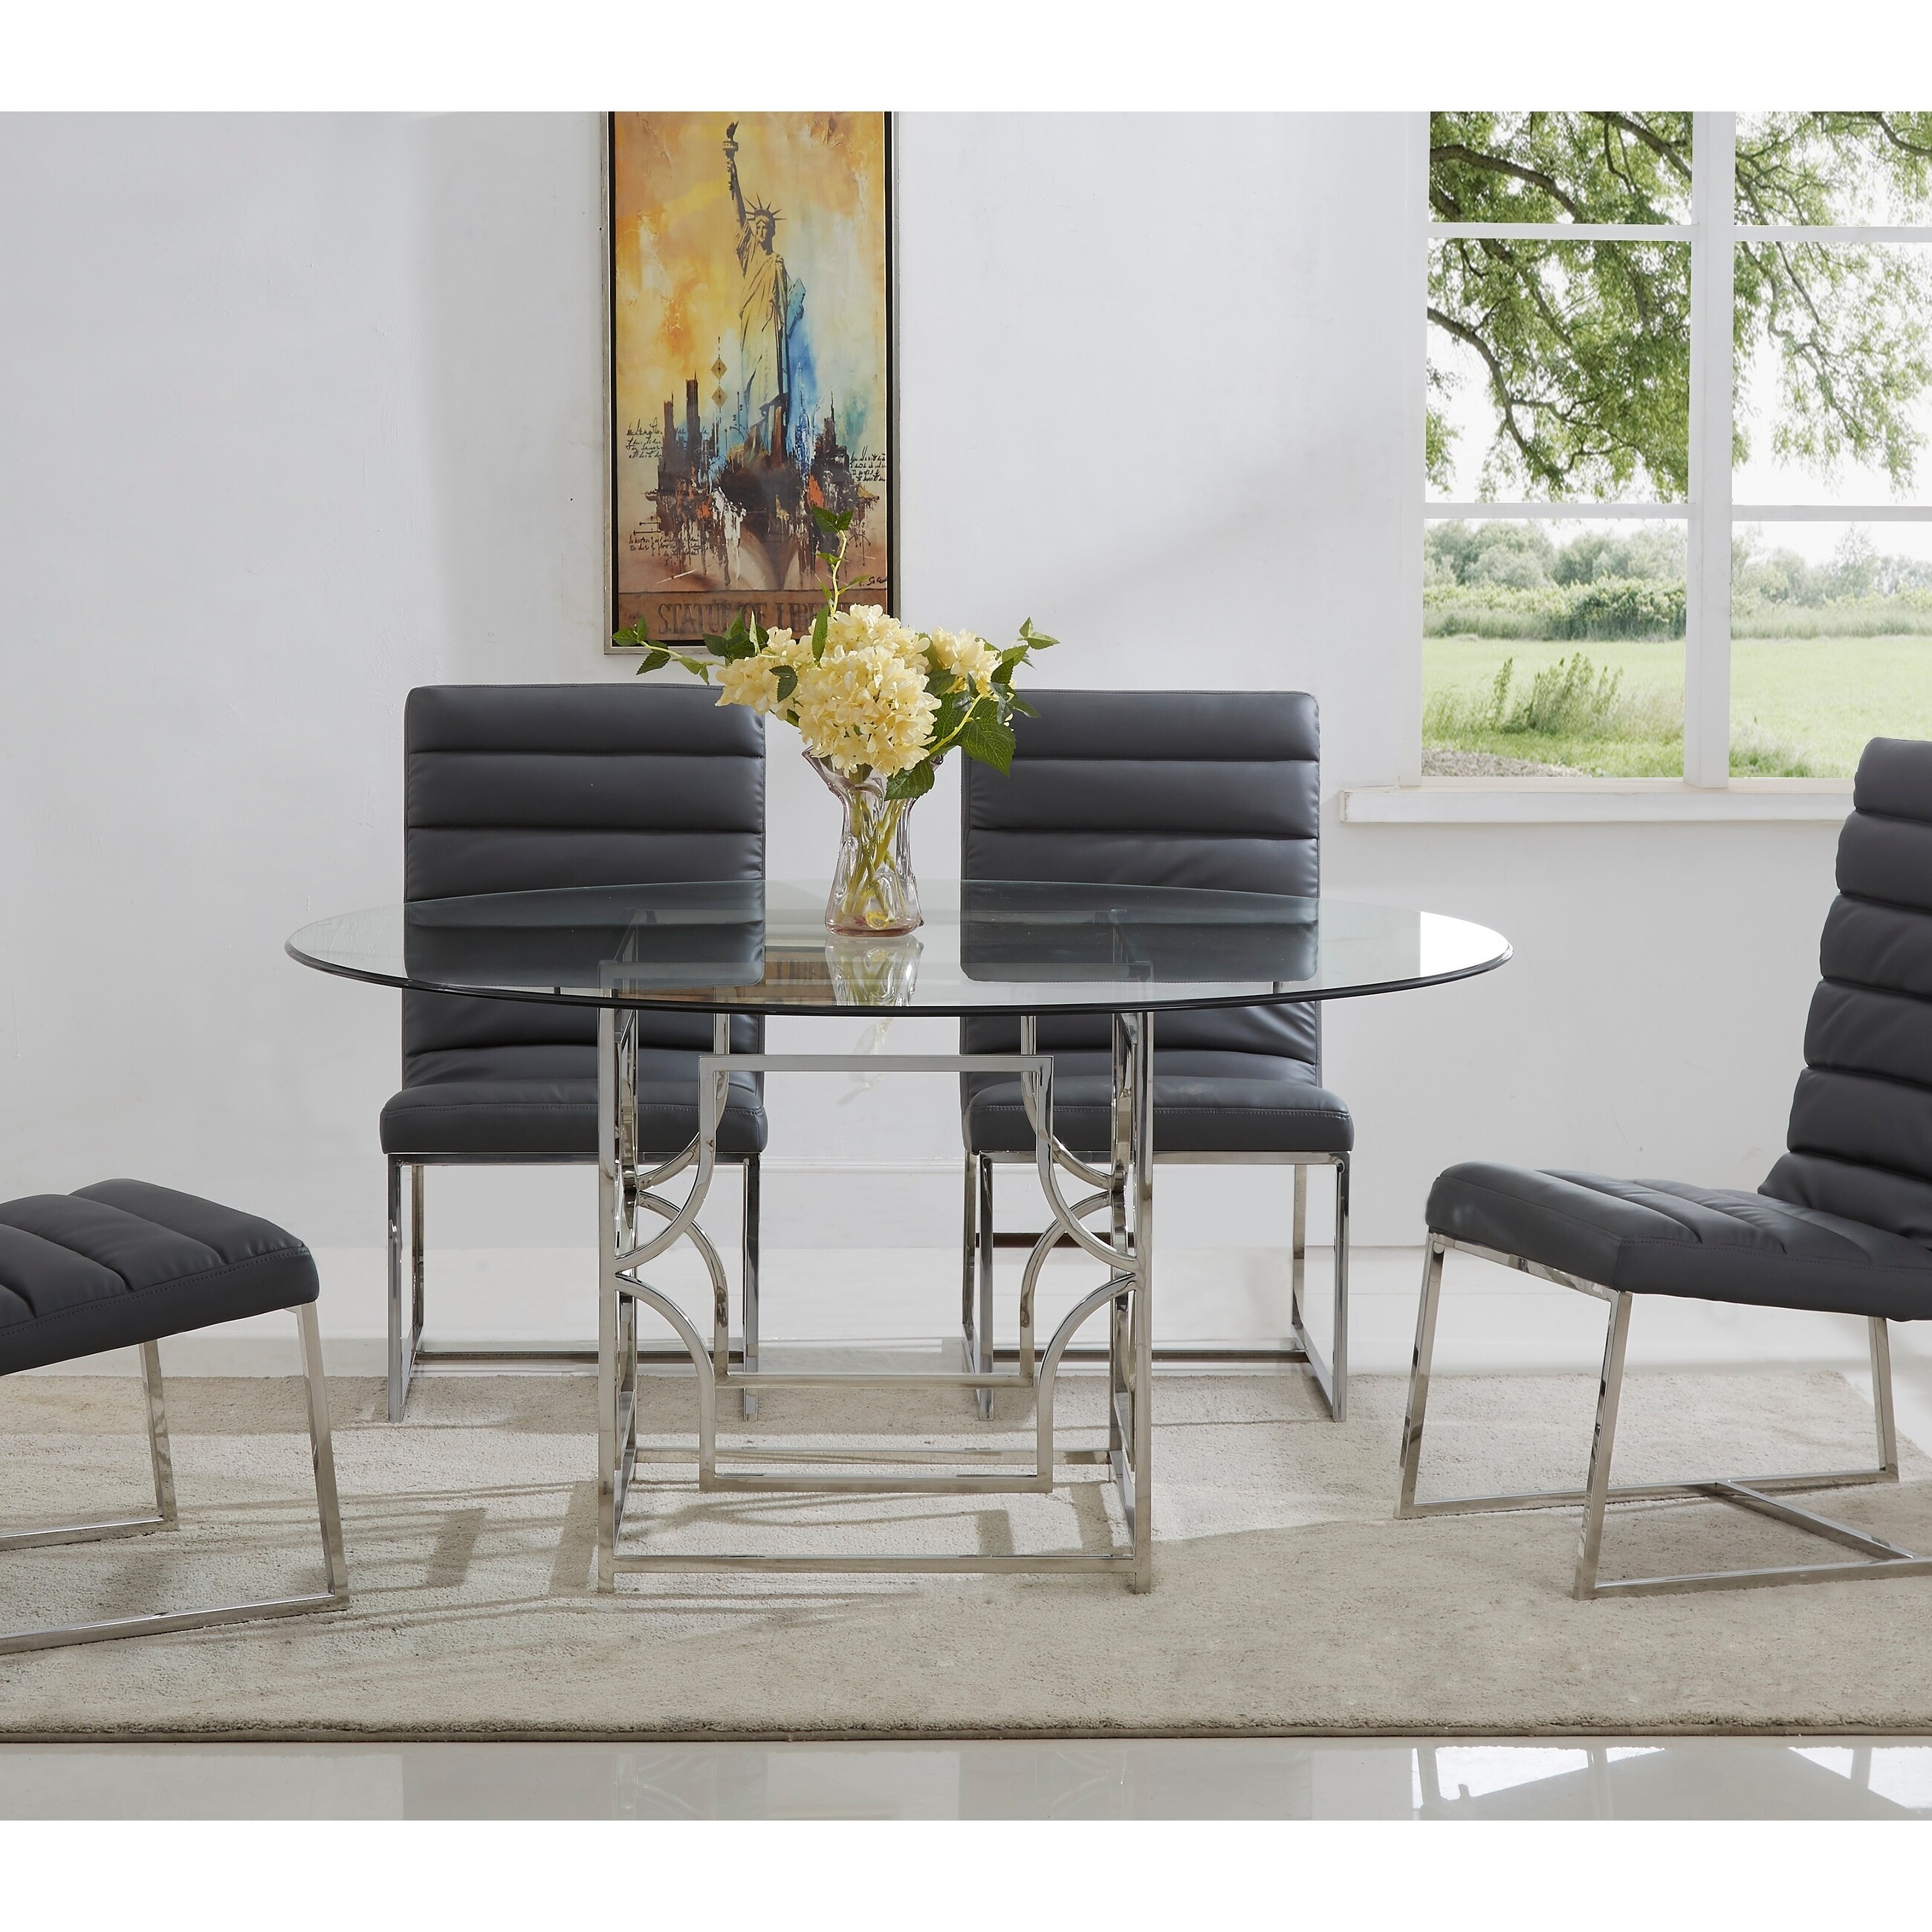 Best Master Furniture 54 Inch Round Glass Dining Table On Sale Overstock 22381619